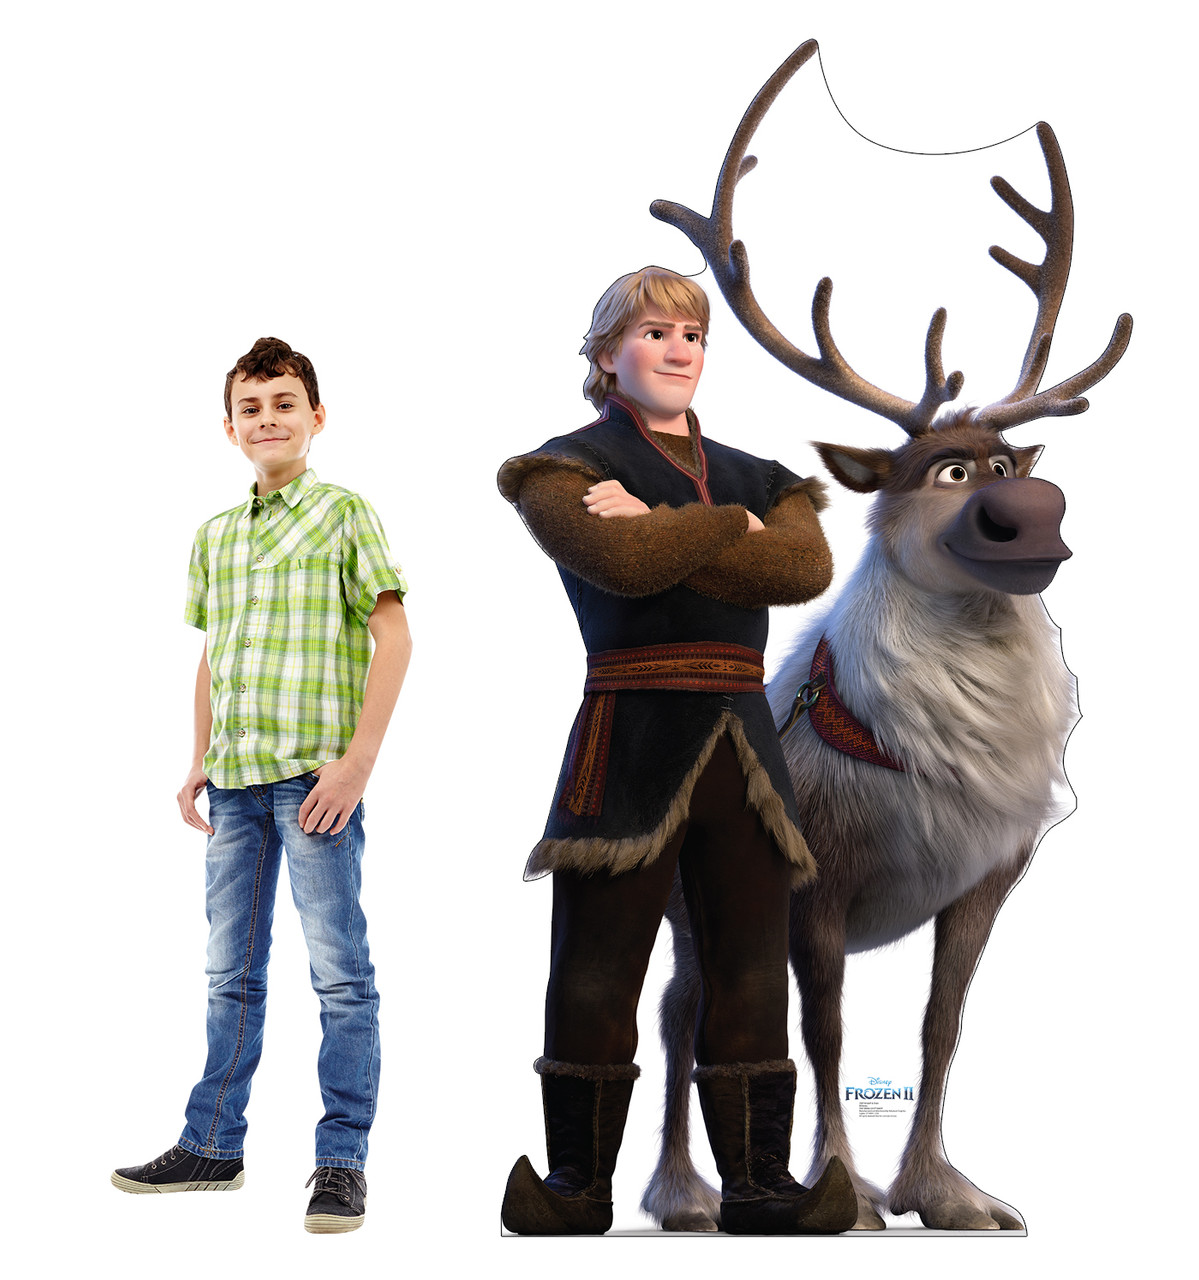 Life-size cardboard standee of Kristoff & Sven from Disney's Frozen 2) with model.